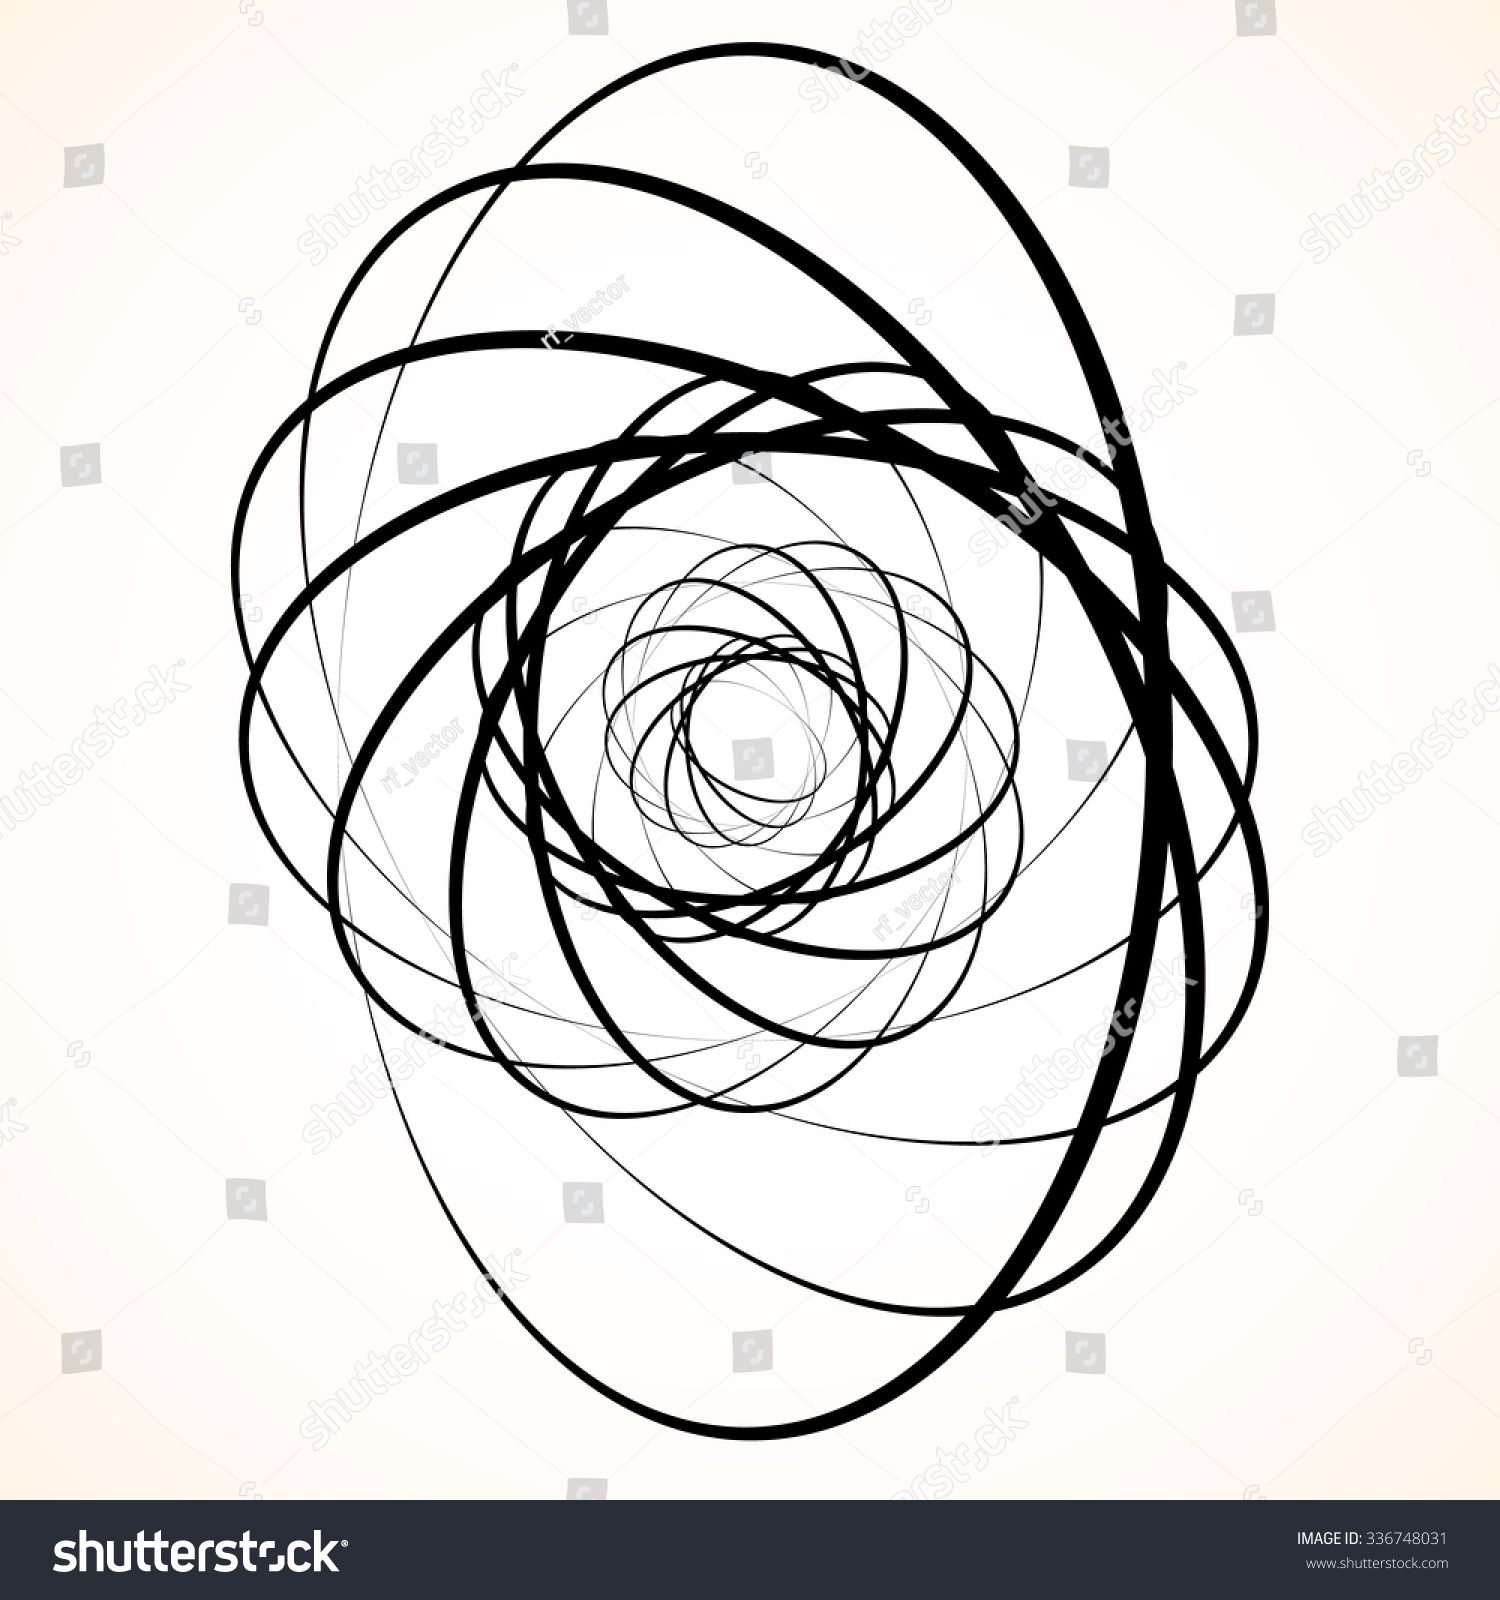 Abstract Circular Element Spinning Swirling Forms Stock Vector ...